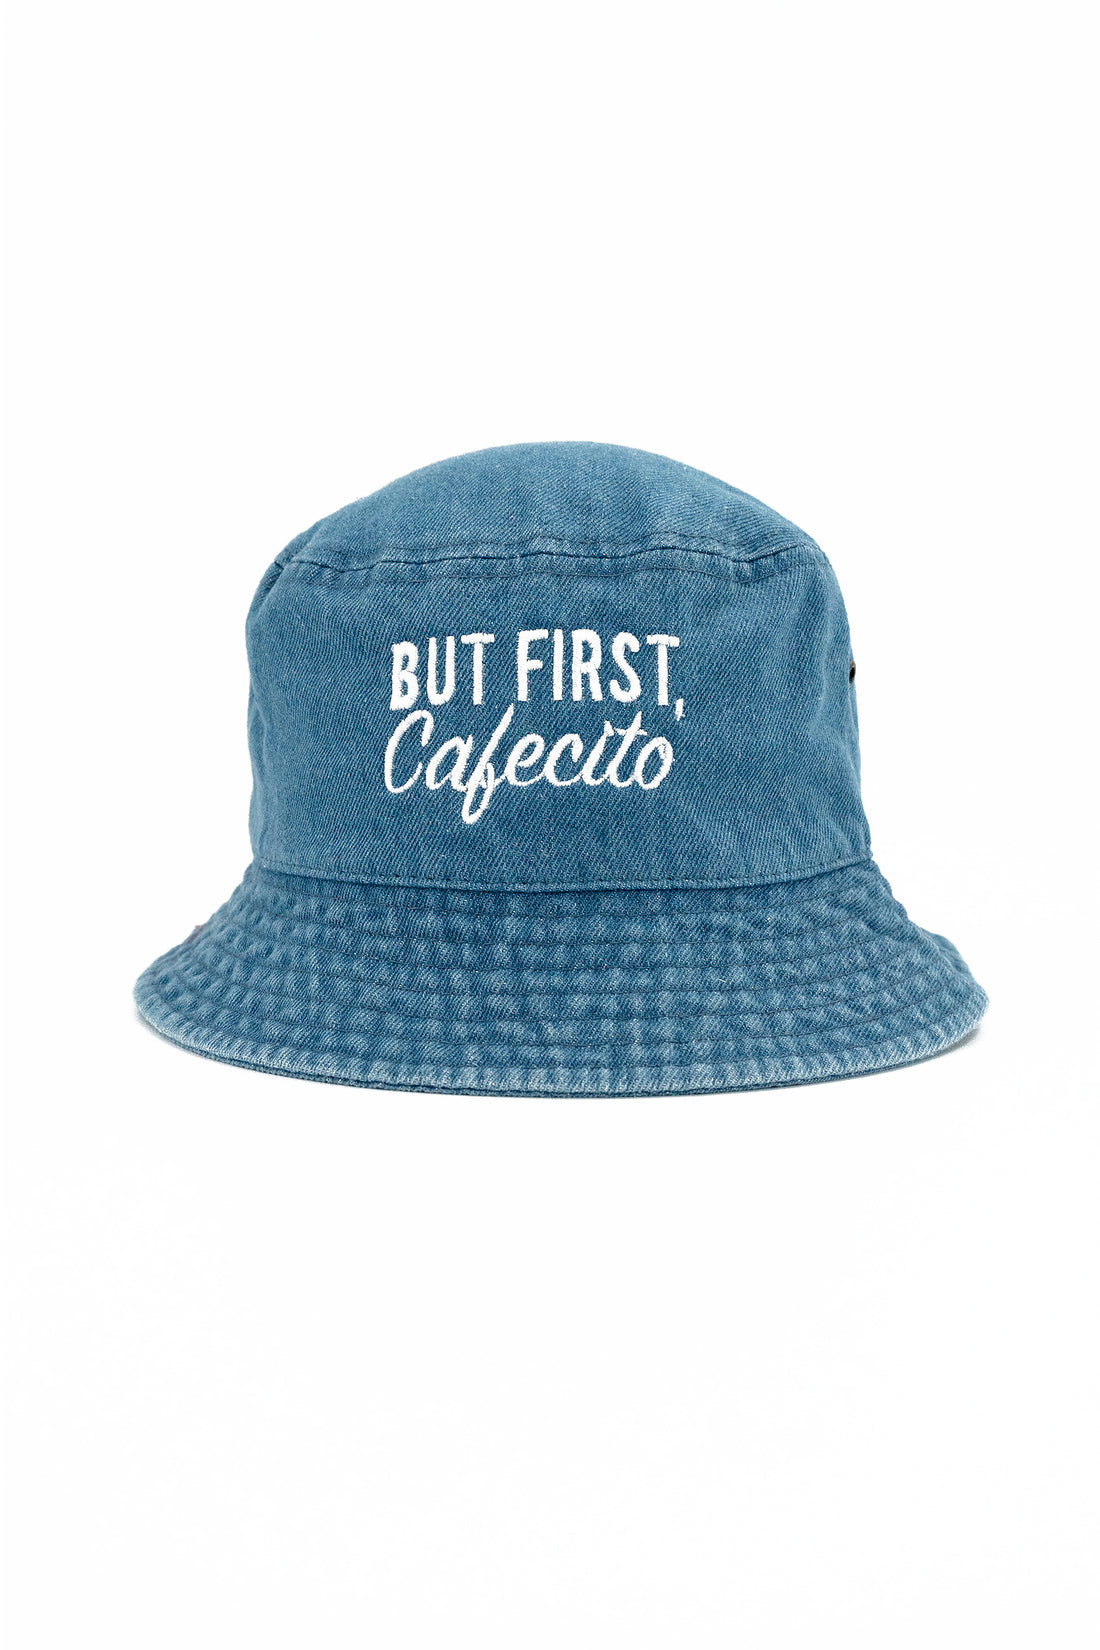 But First Cafecito Bucket Hat